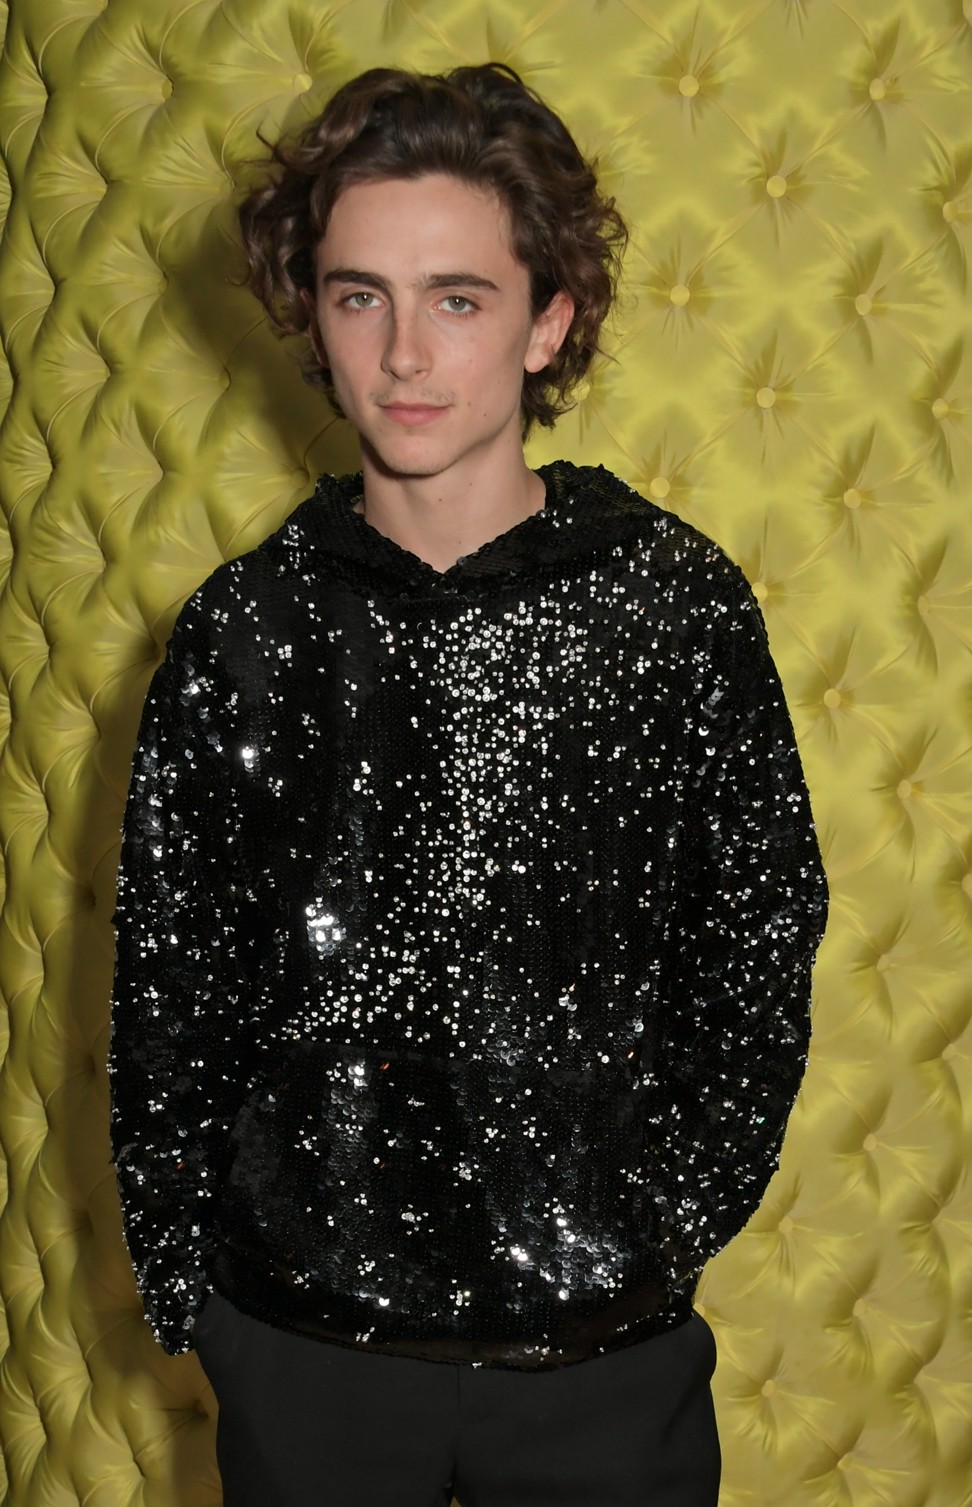 Timothée Chalamet Shakes up the Red Carpet with a High-Fashion Hoodie